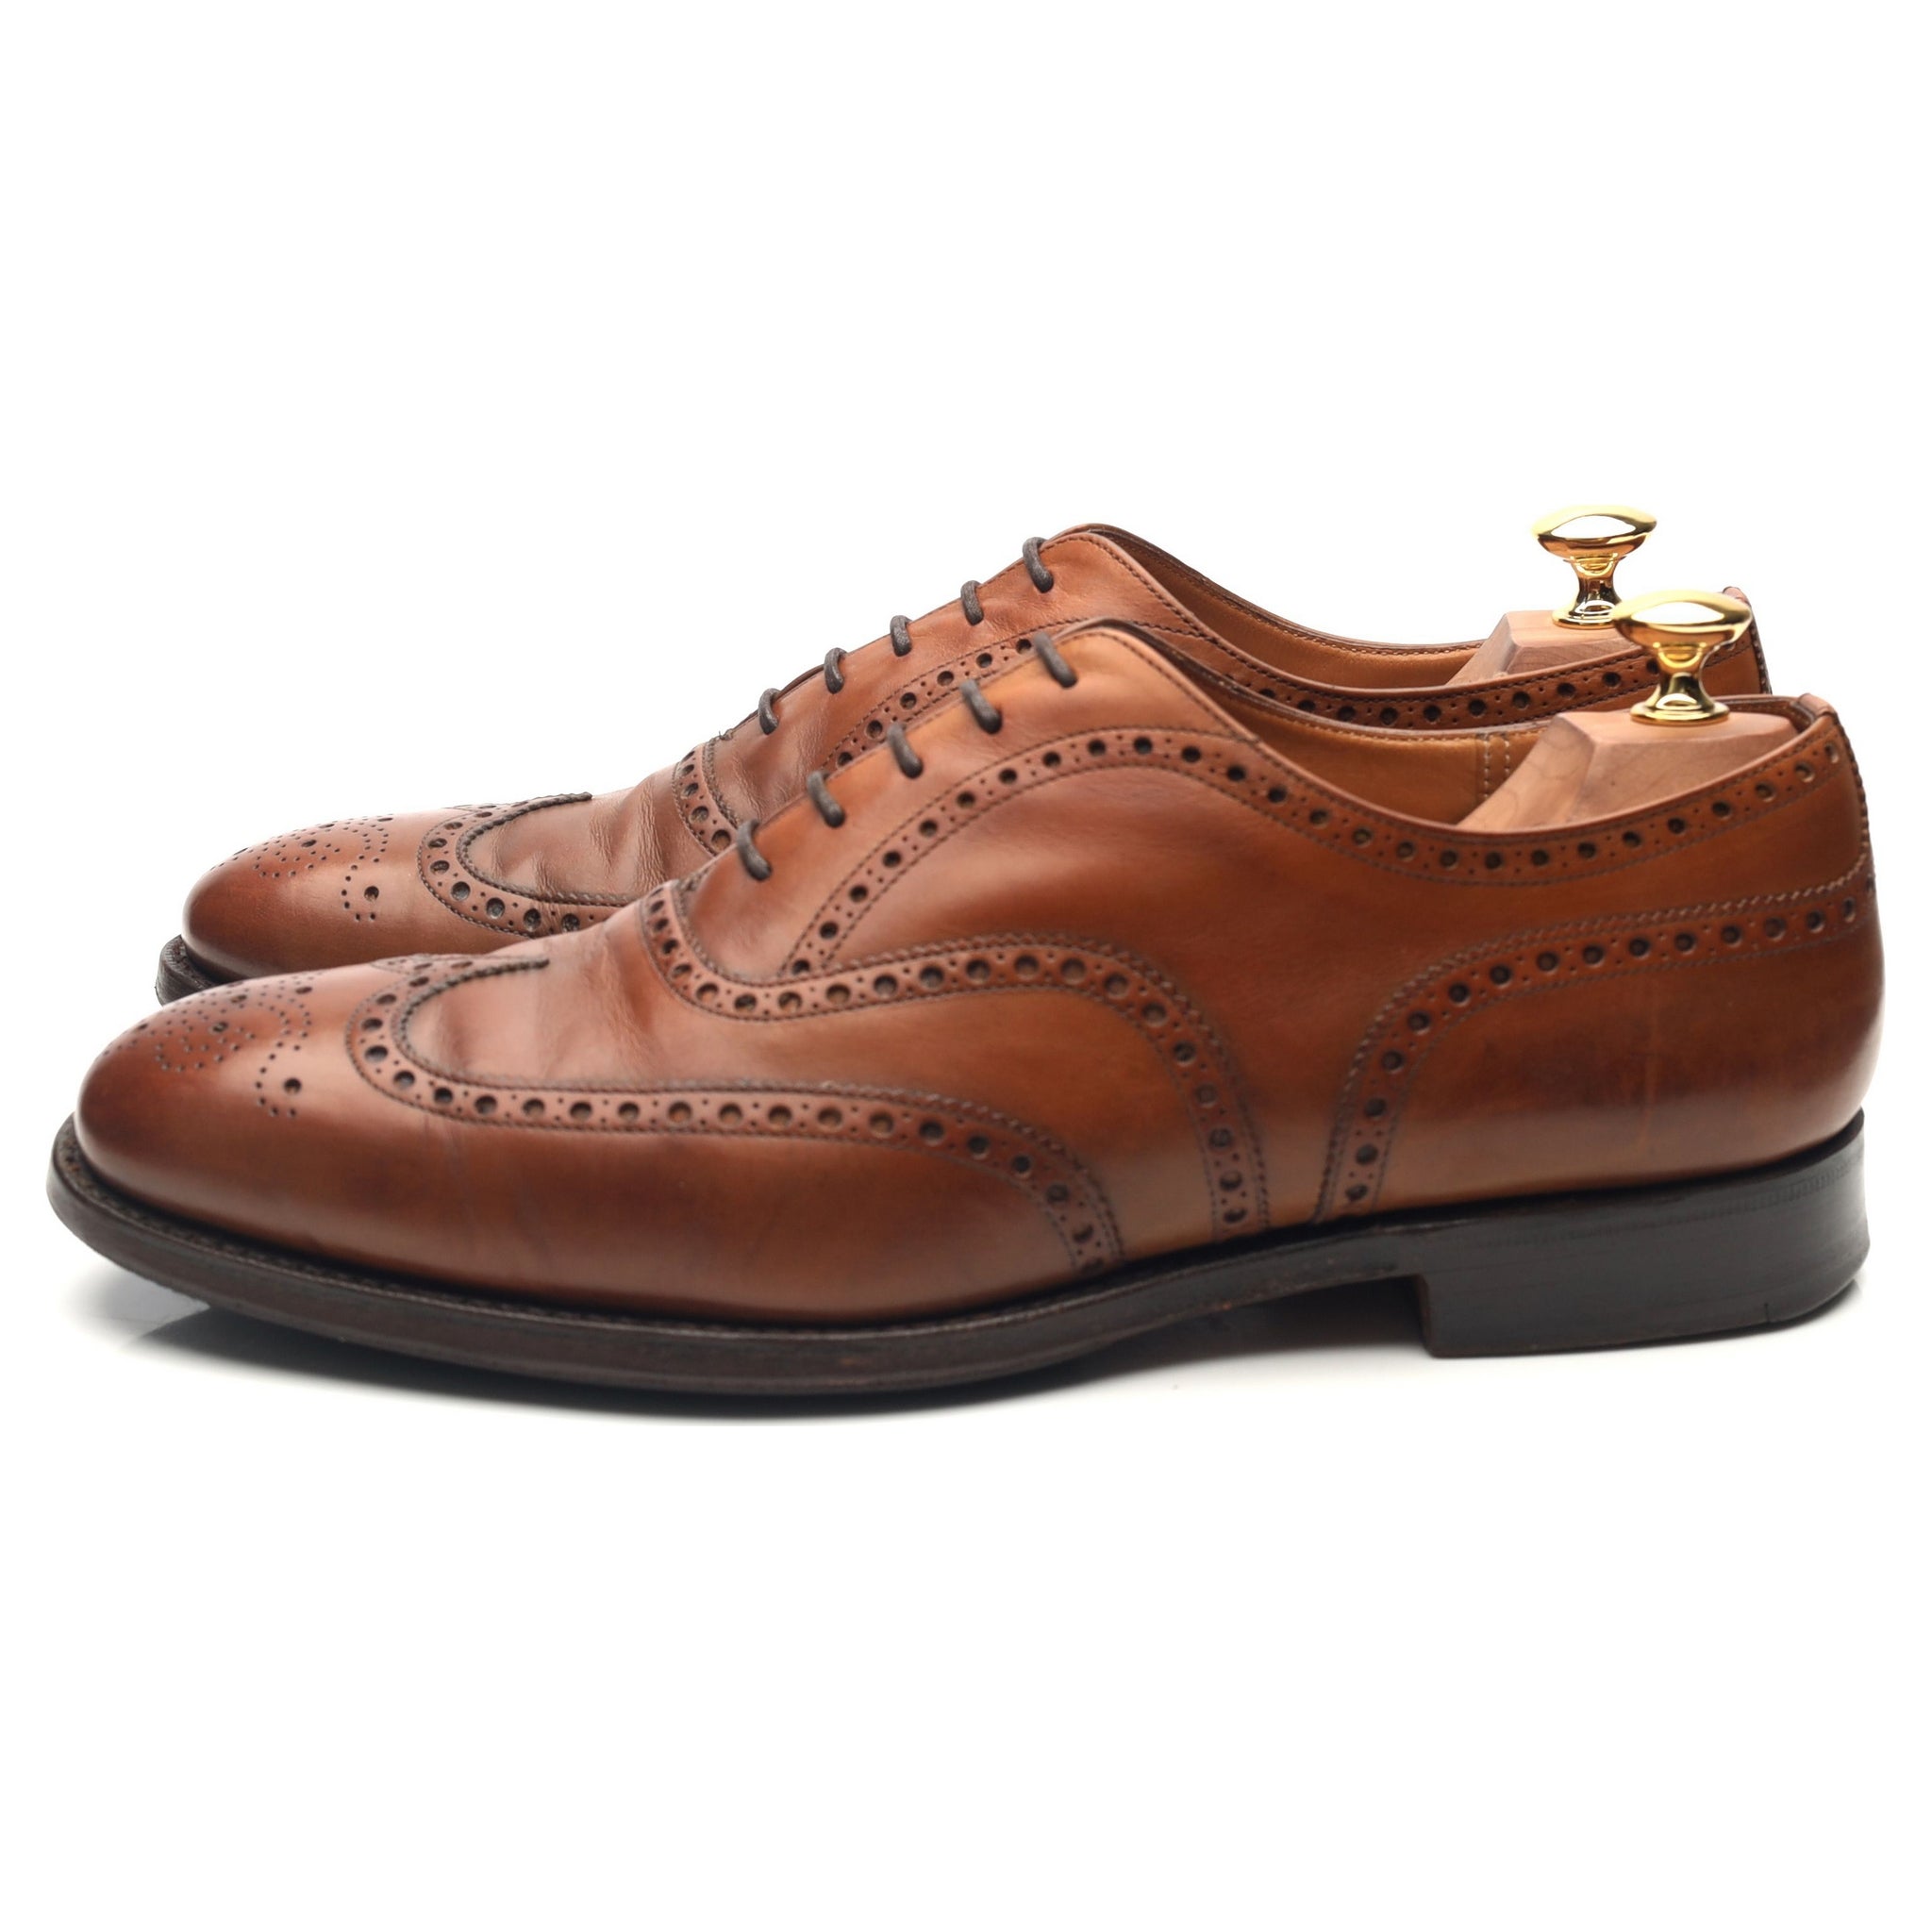 'Chetwynd' Tan Brown Leather Brogues UK 9 G - Abbot's Shoes